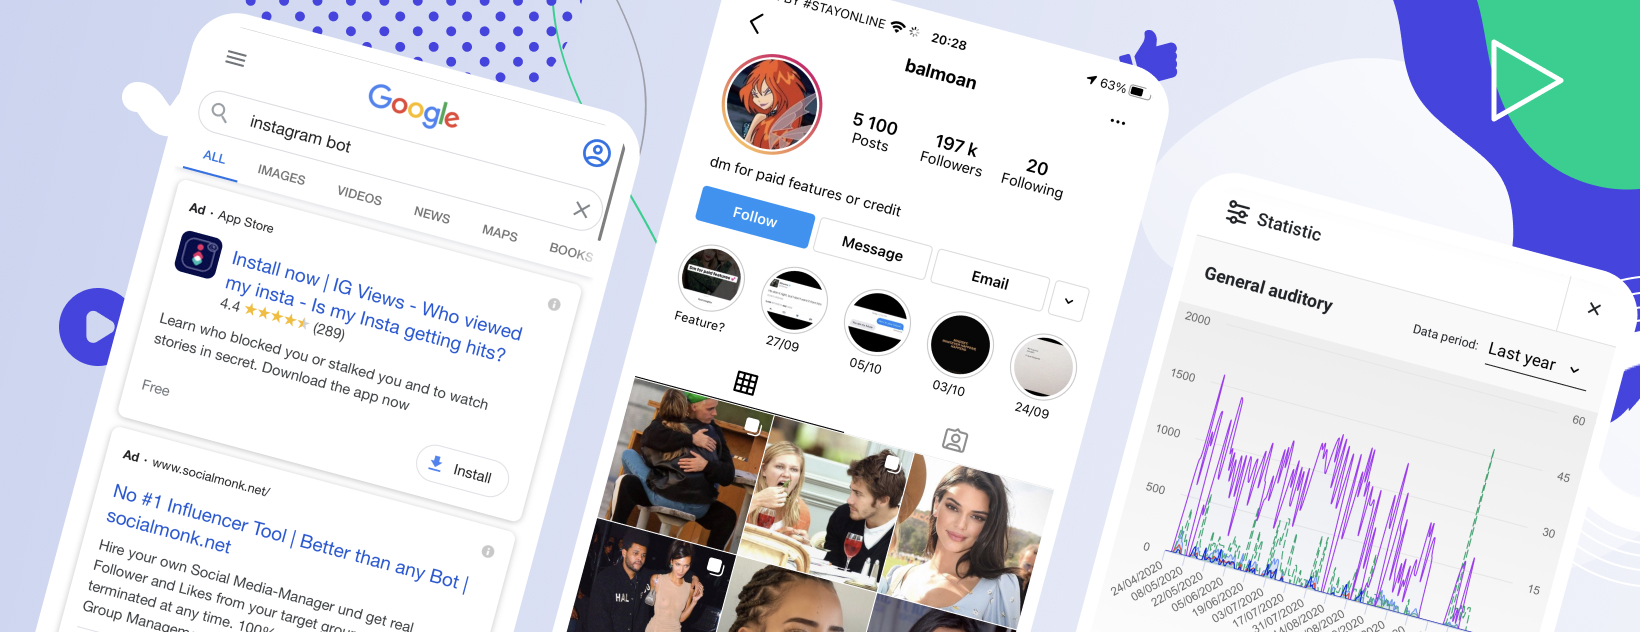 Get Instagram followers fast with a bot - is it real in 2022?